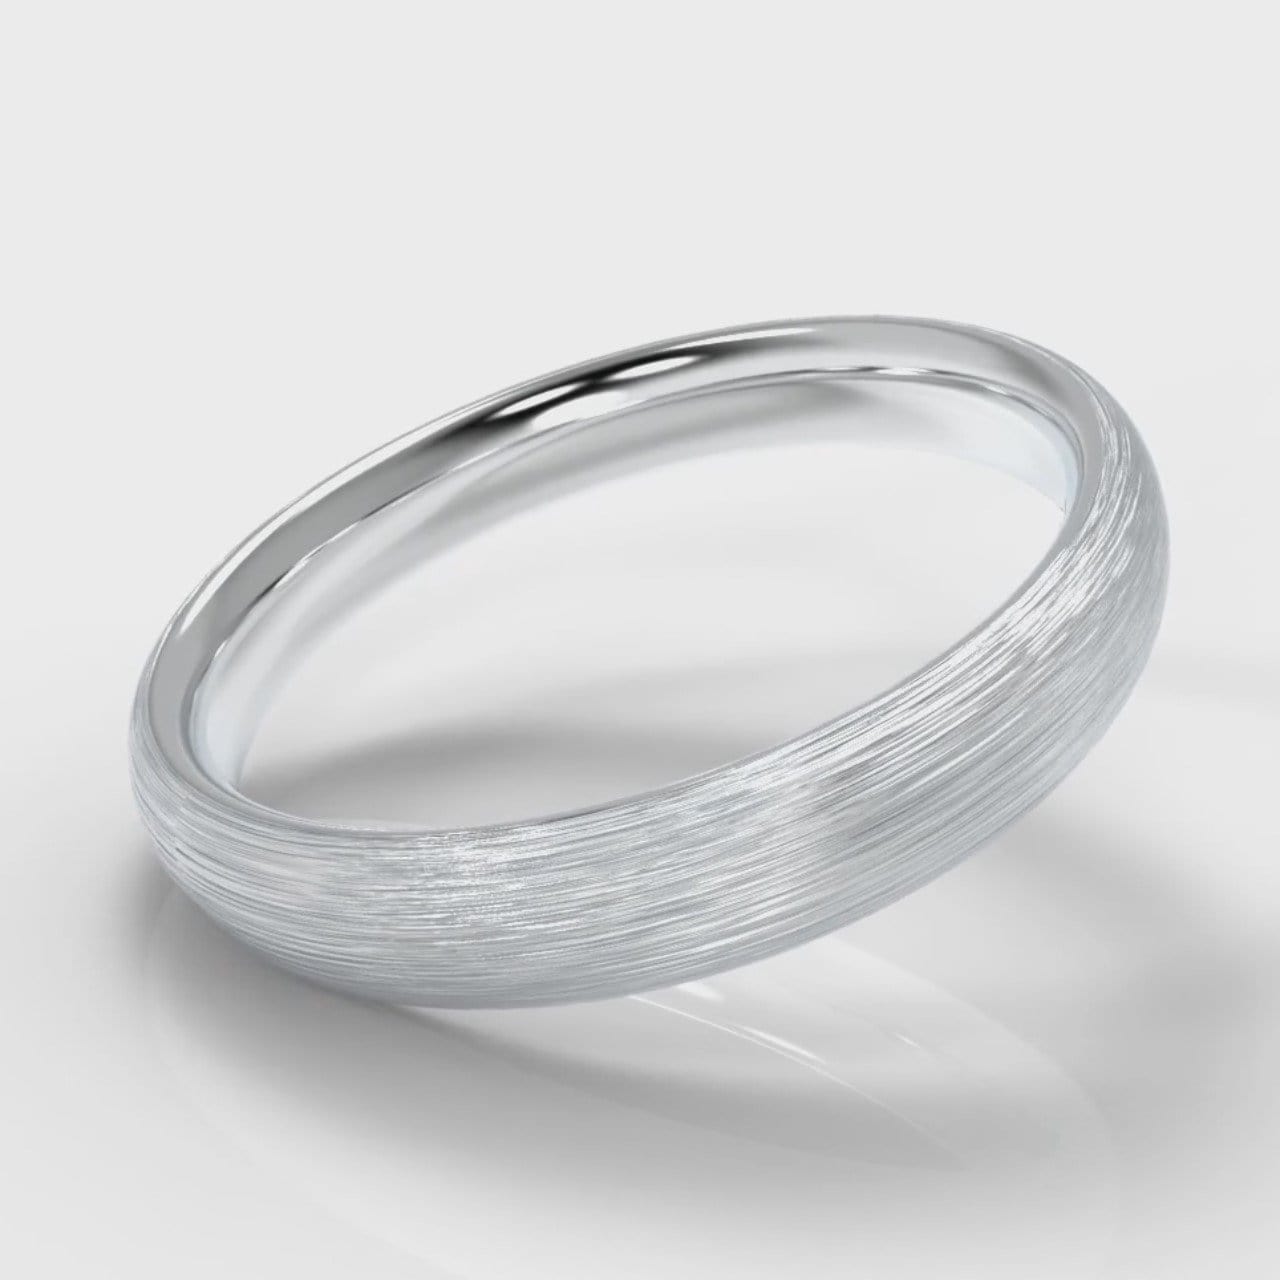 4mm Court Shaped Comfort Fit Brushed Wedding Ring